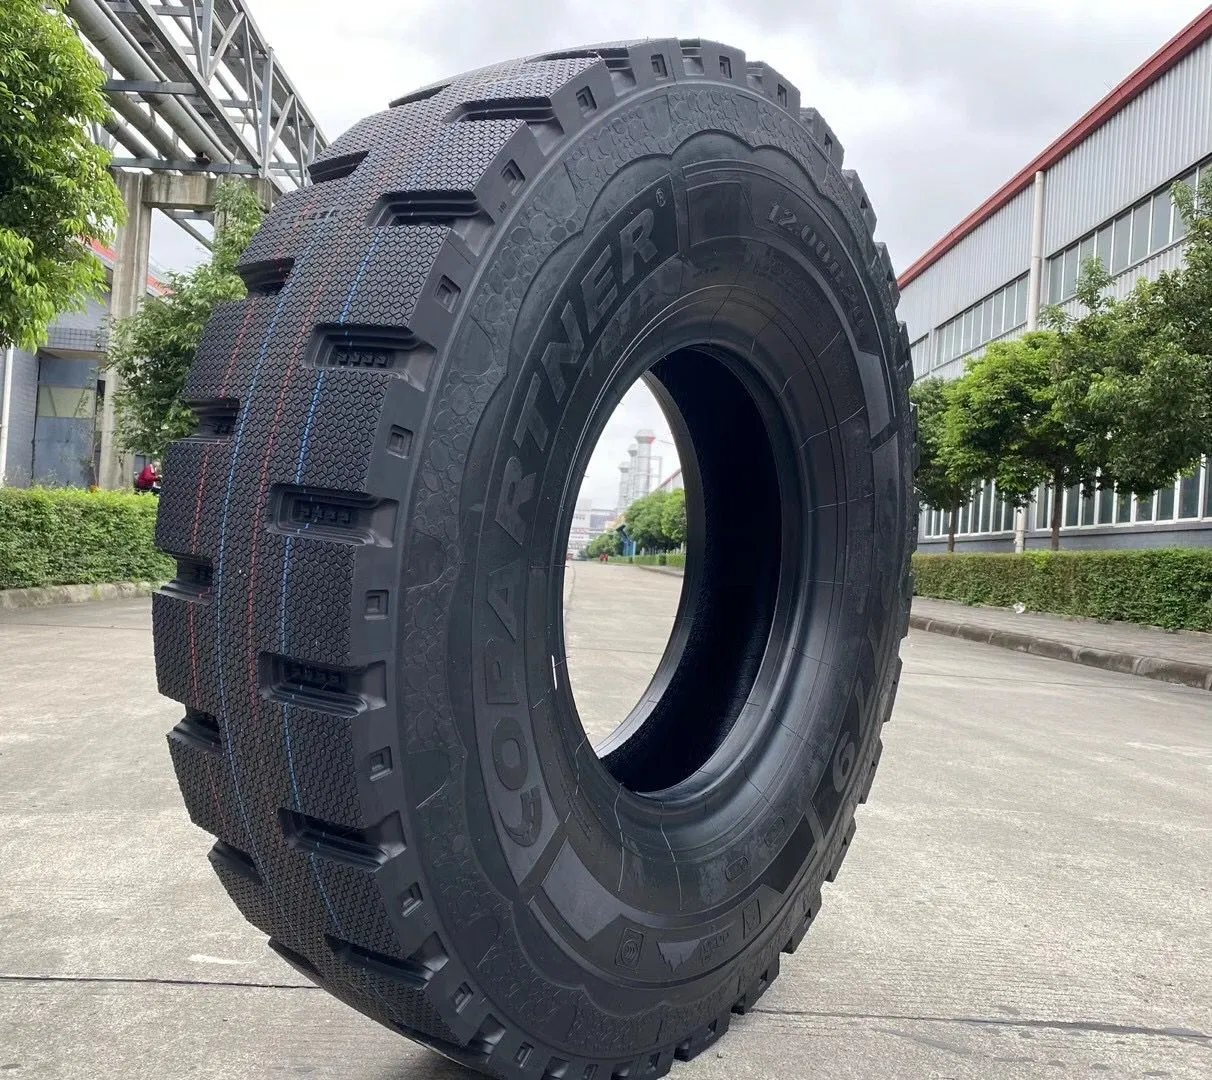 New Frideric Large Stock Pattern 1200r20 10.00r24 12r22.5 315/80r22.5 Factory Direct Supply Drive Position Mine Tyres Heavy Duty Bus Tire TBR Truck Tyres